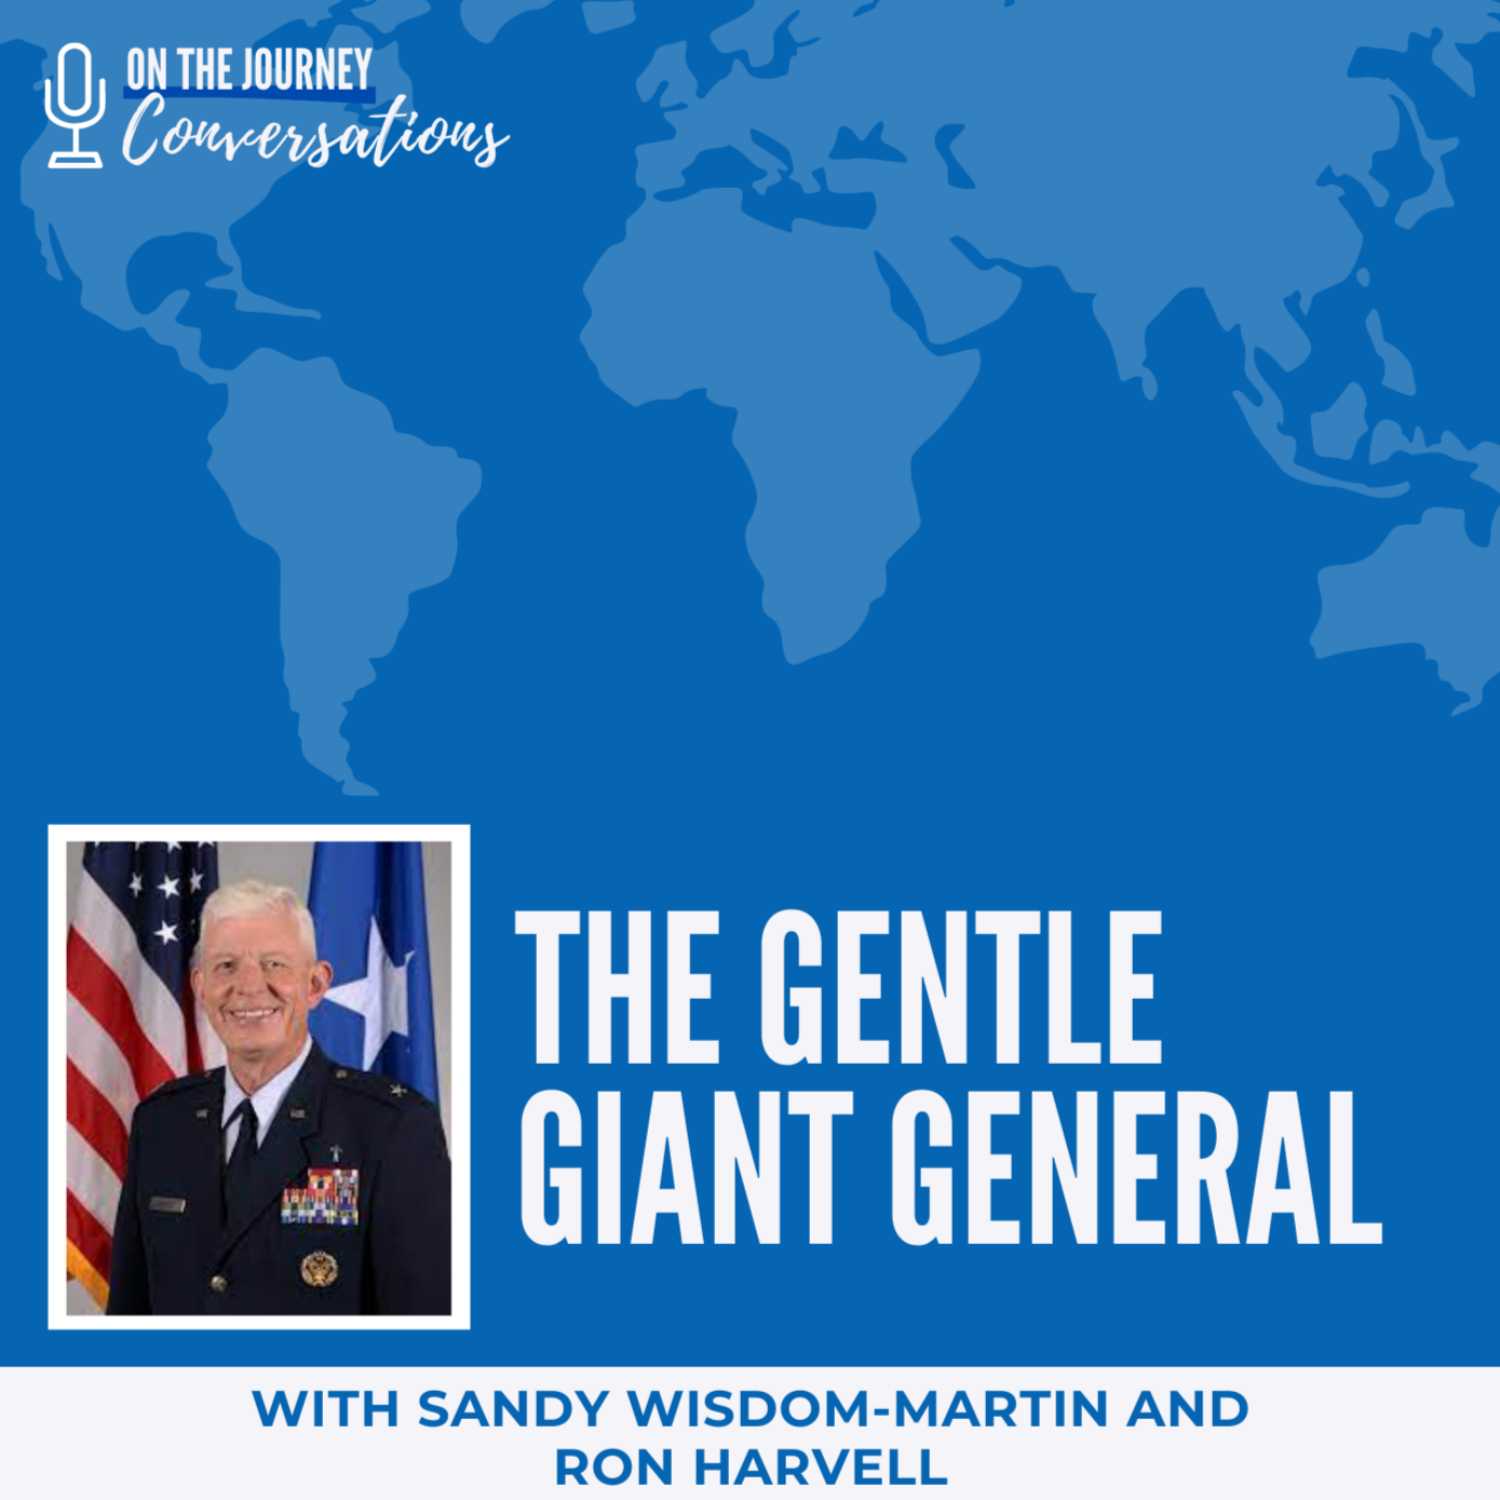 The Gentle Giant General